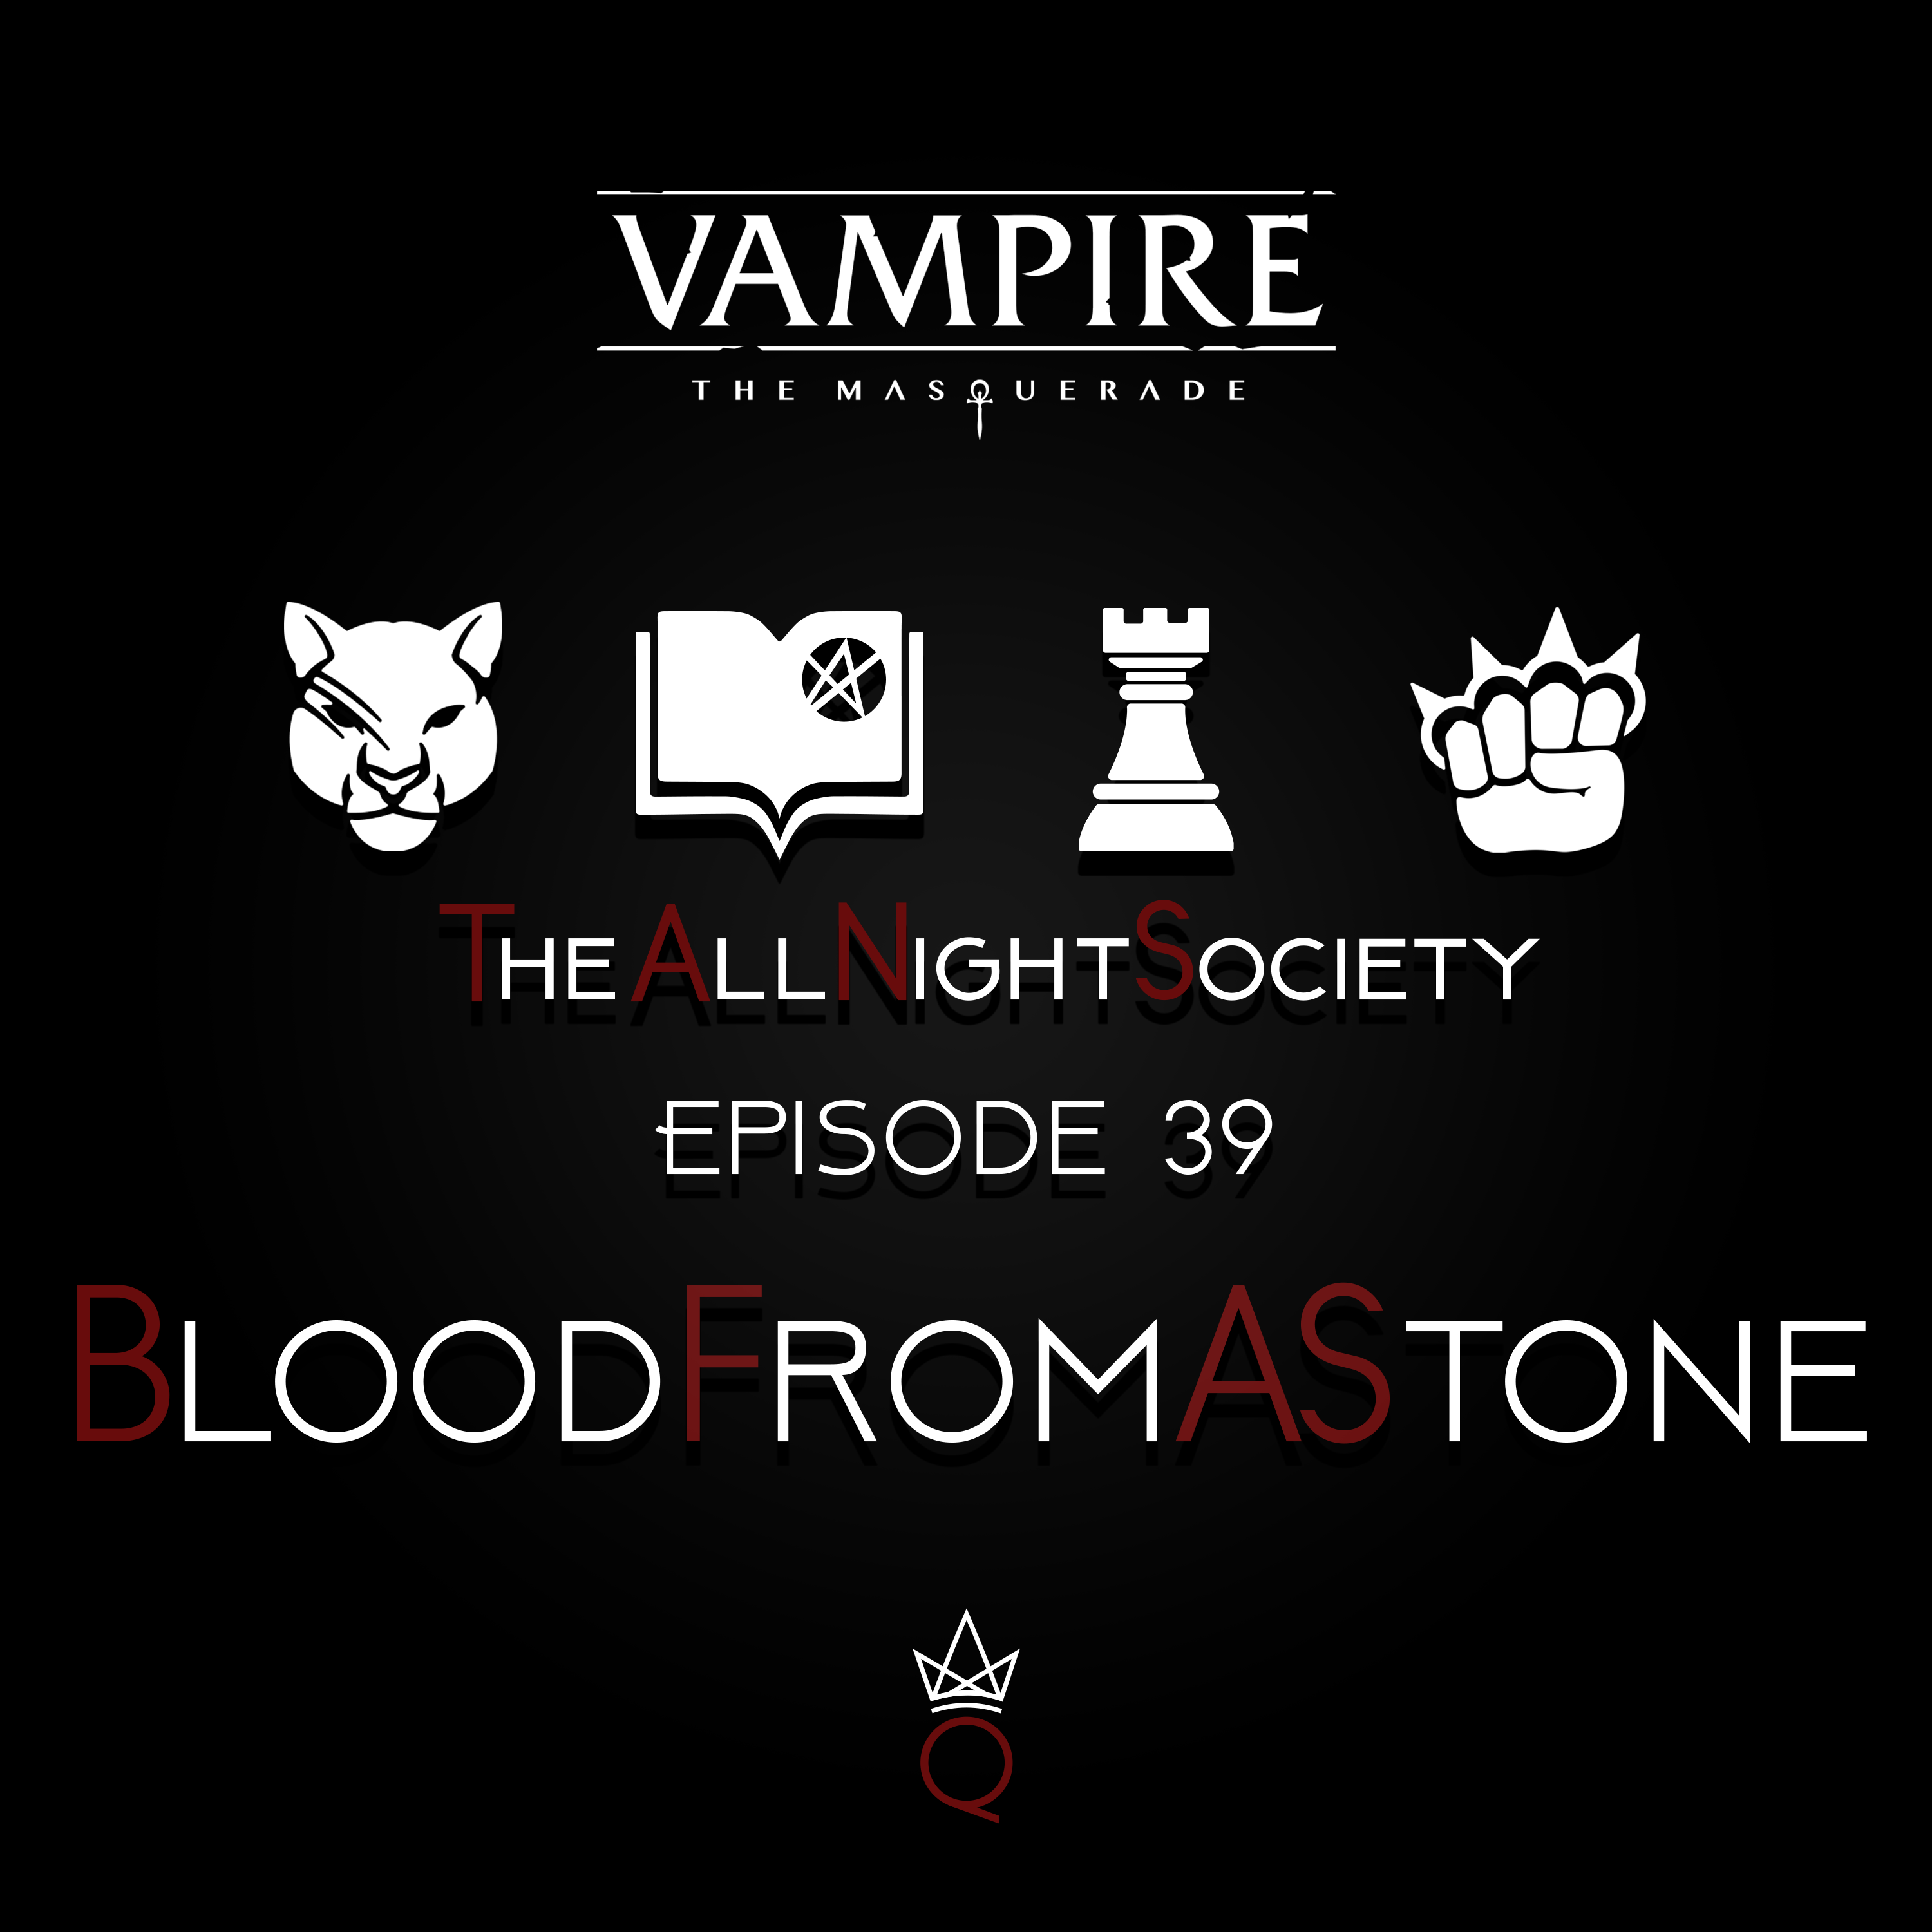 Episode 39 - Blood from a Stone